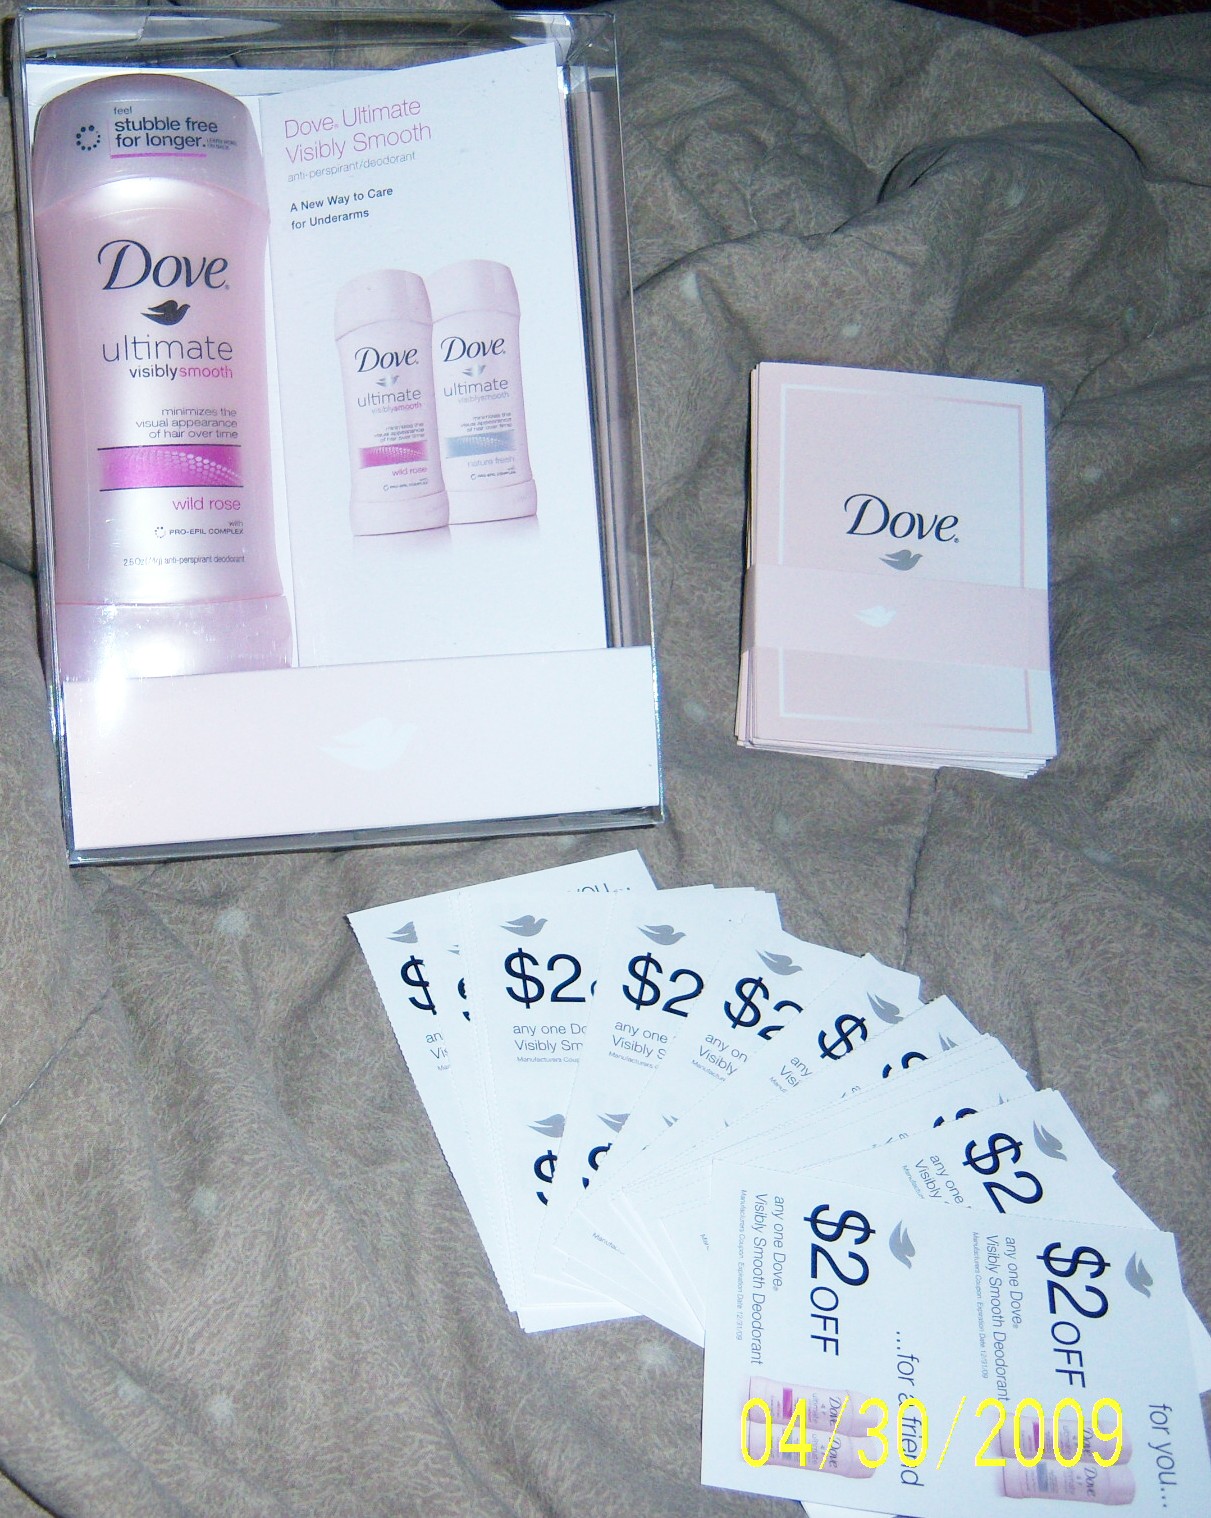 Dove Ultimate Visibly smooth deodorant coupons and brochures